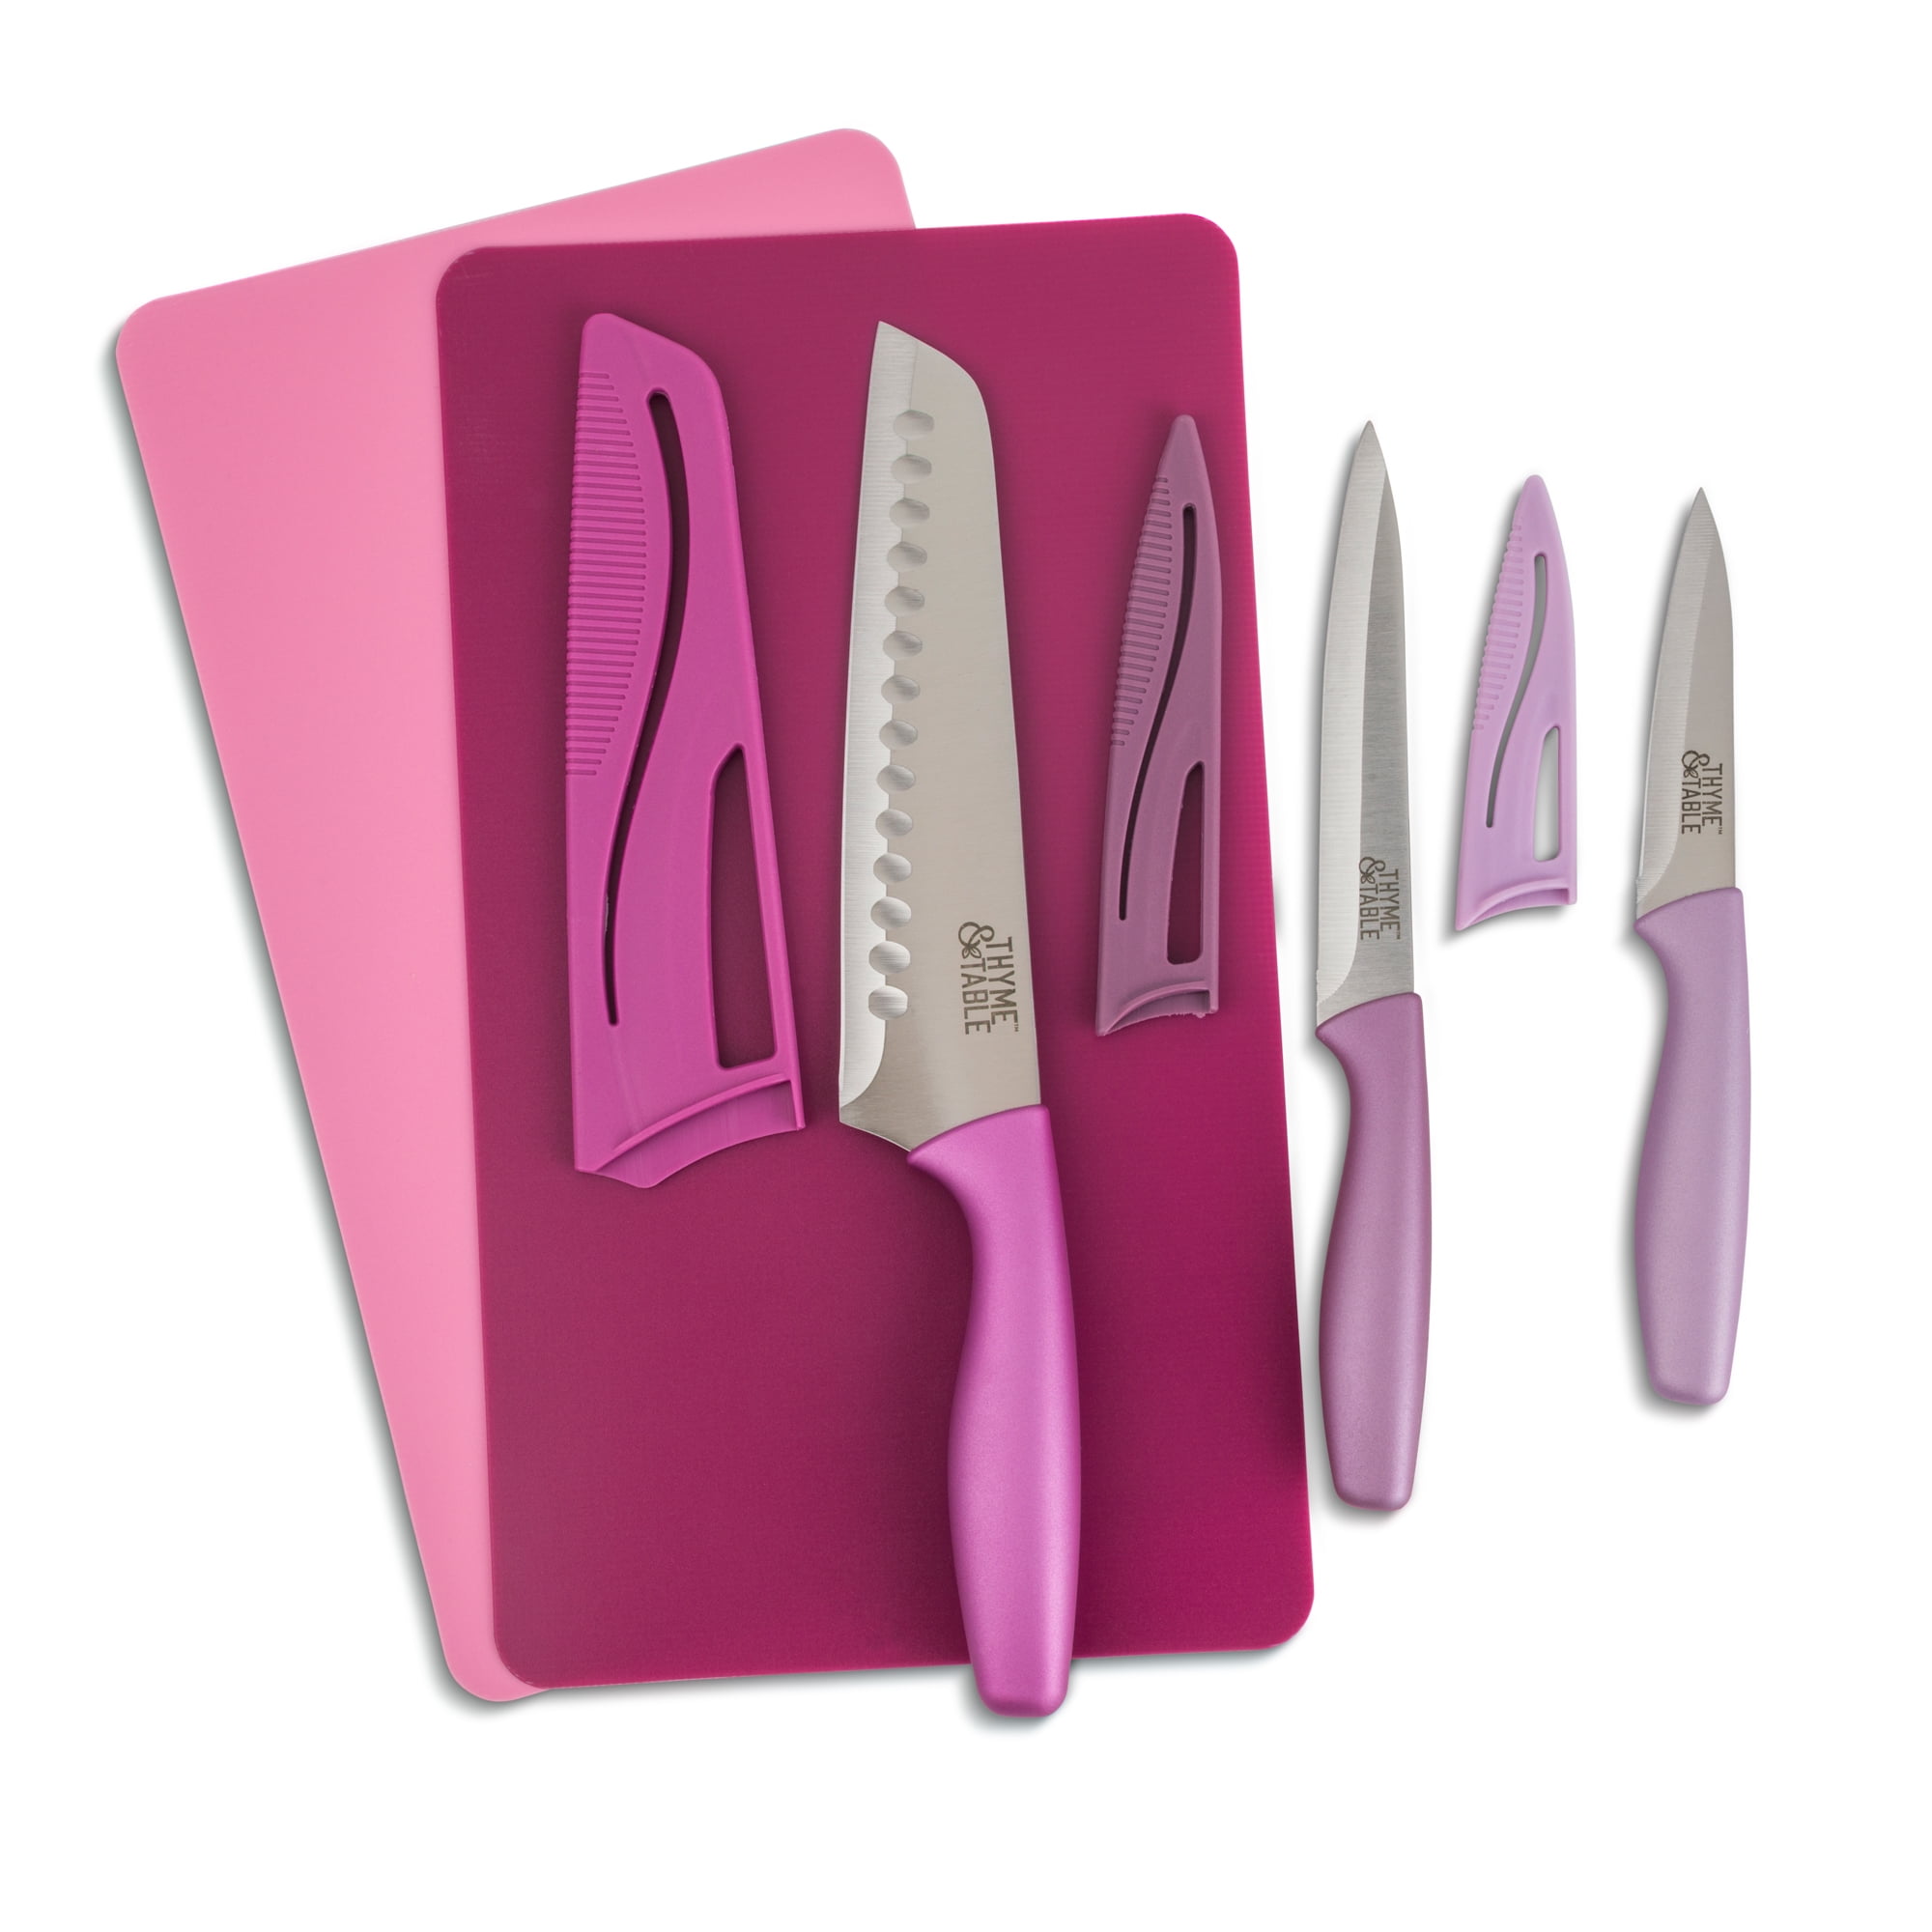 Thyme & Table Knife & Cutting Mat 5-Piece Set, Lavender 